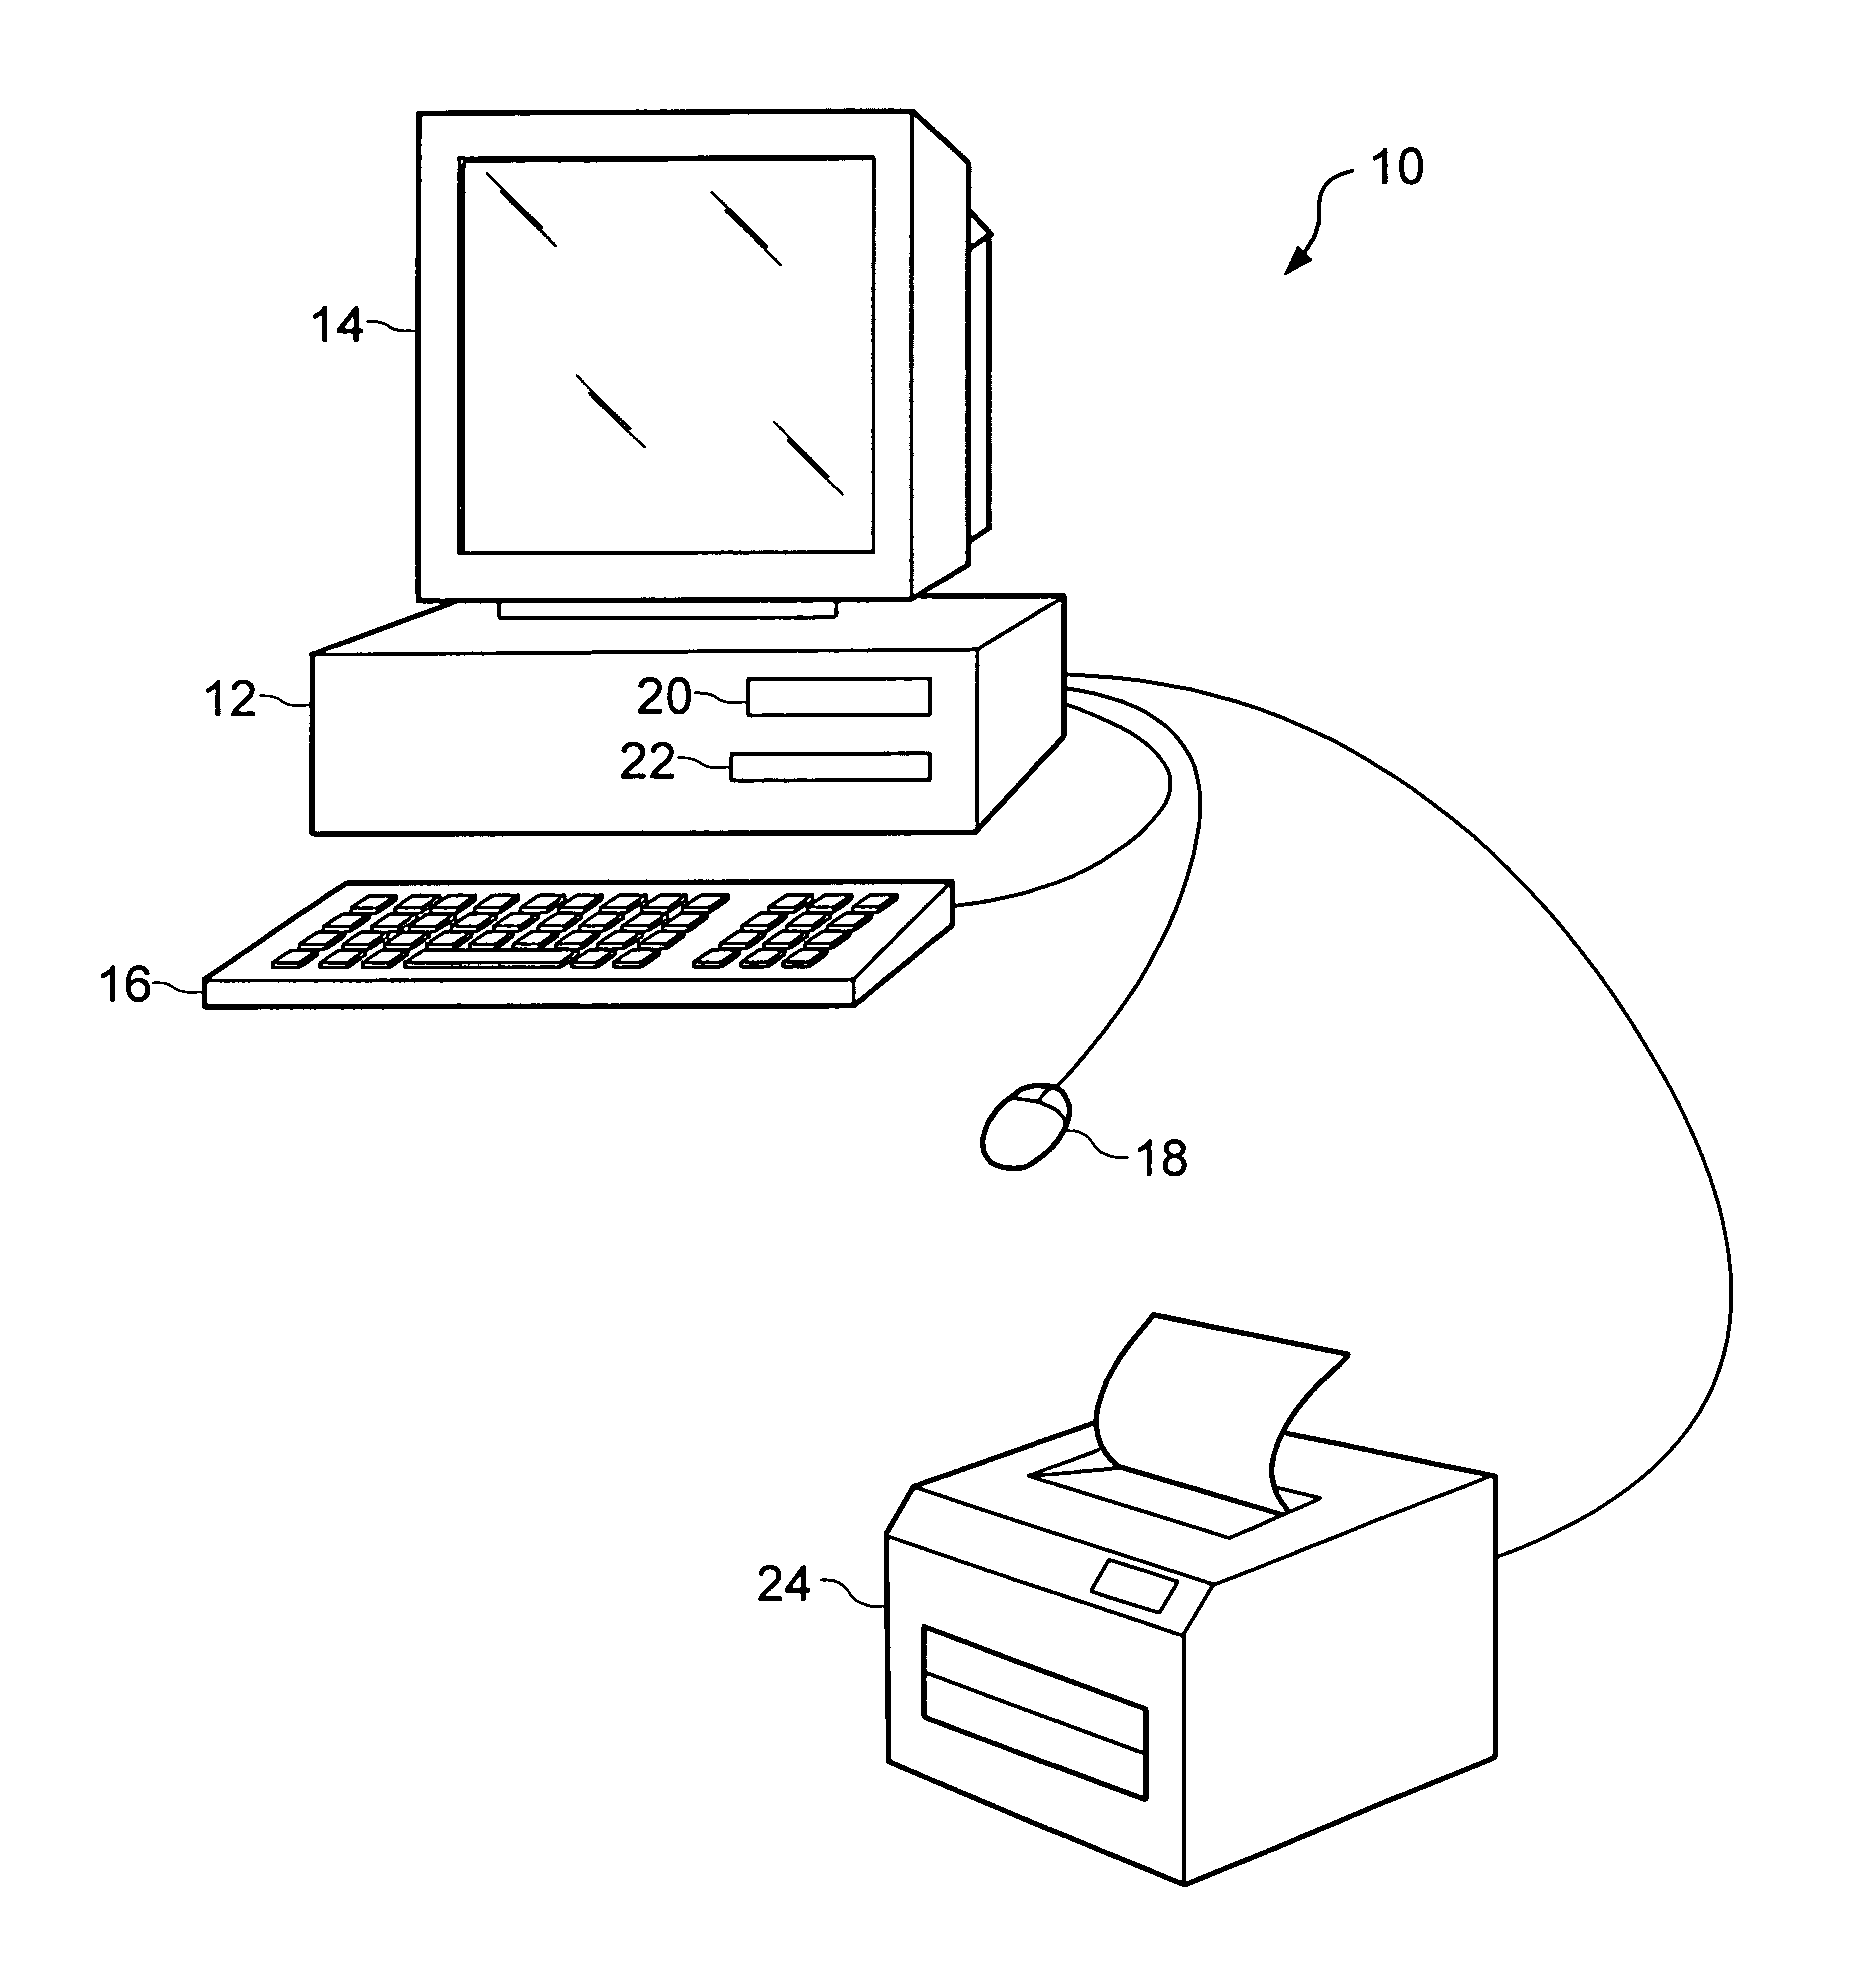 Method and apparatus for resource access synchronization